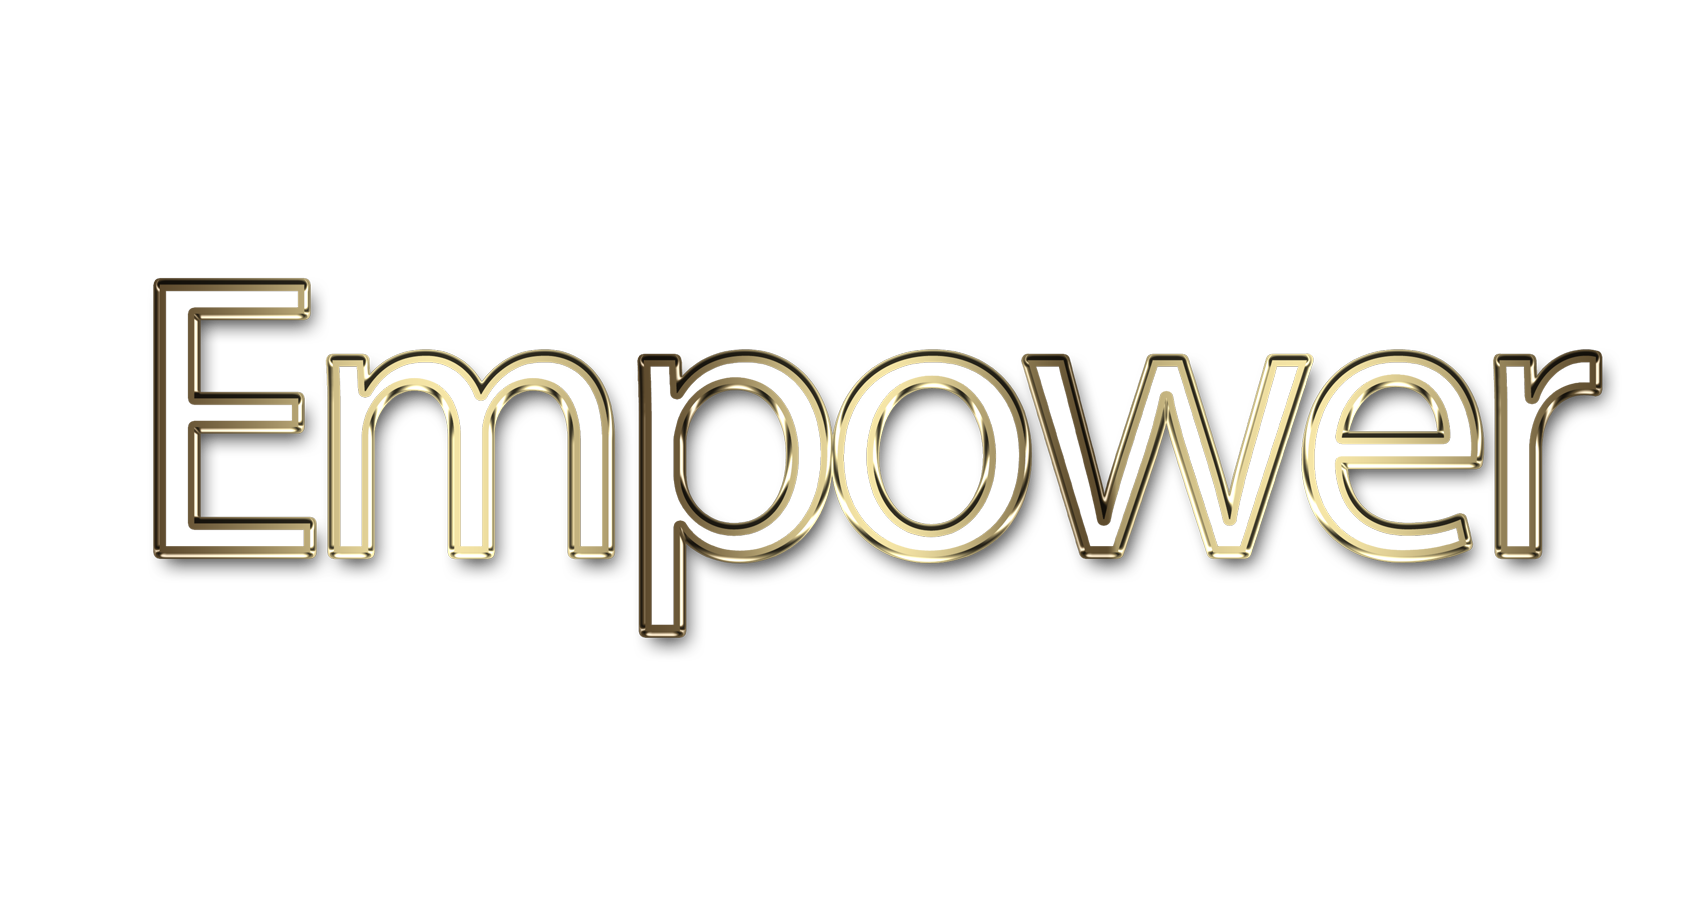 Empower png, word Empower png, Empower word png, Empower text png, Empower letters png, Empower word art typography PNG images, transparent png